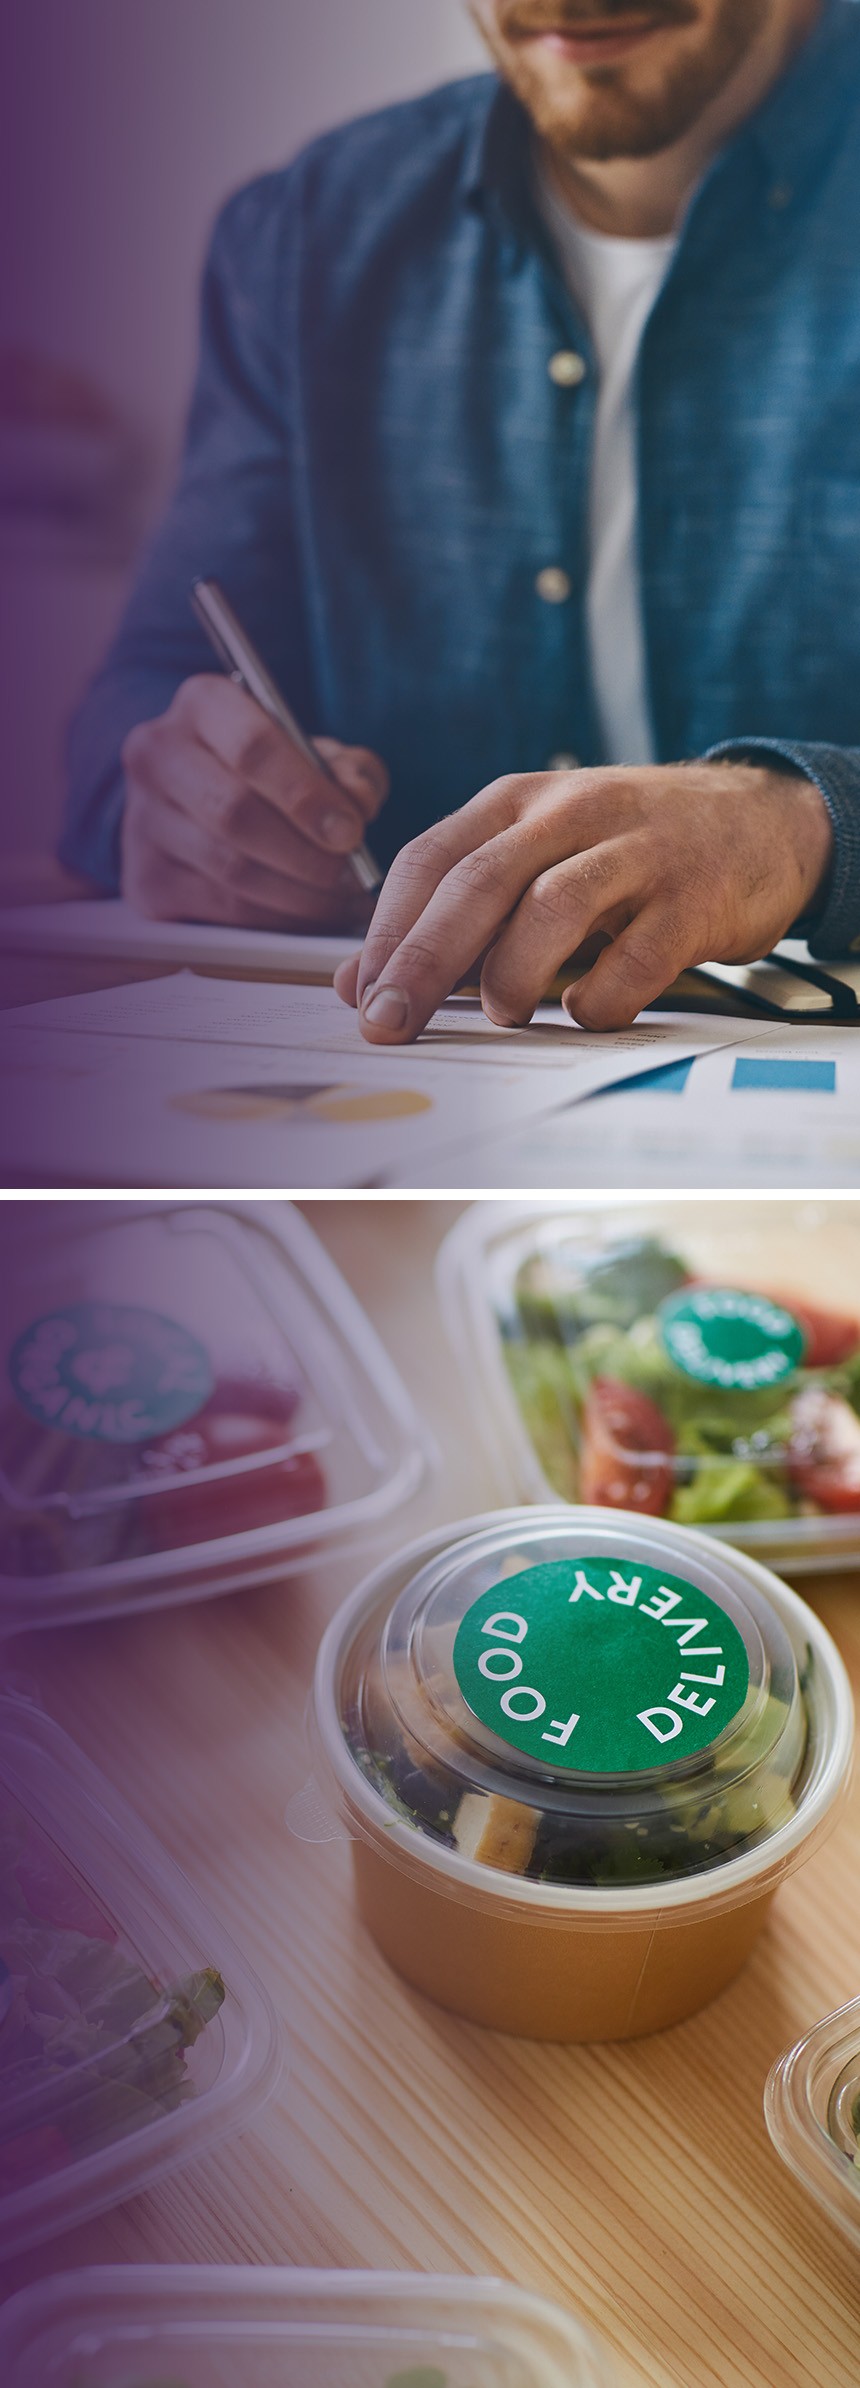 Two image collage: One of a man writing on a piece of paper, the other, some packed food in plastic containers with a custom printed label